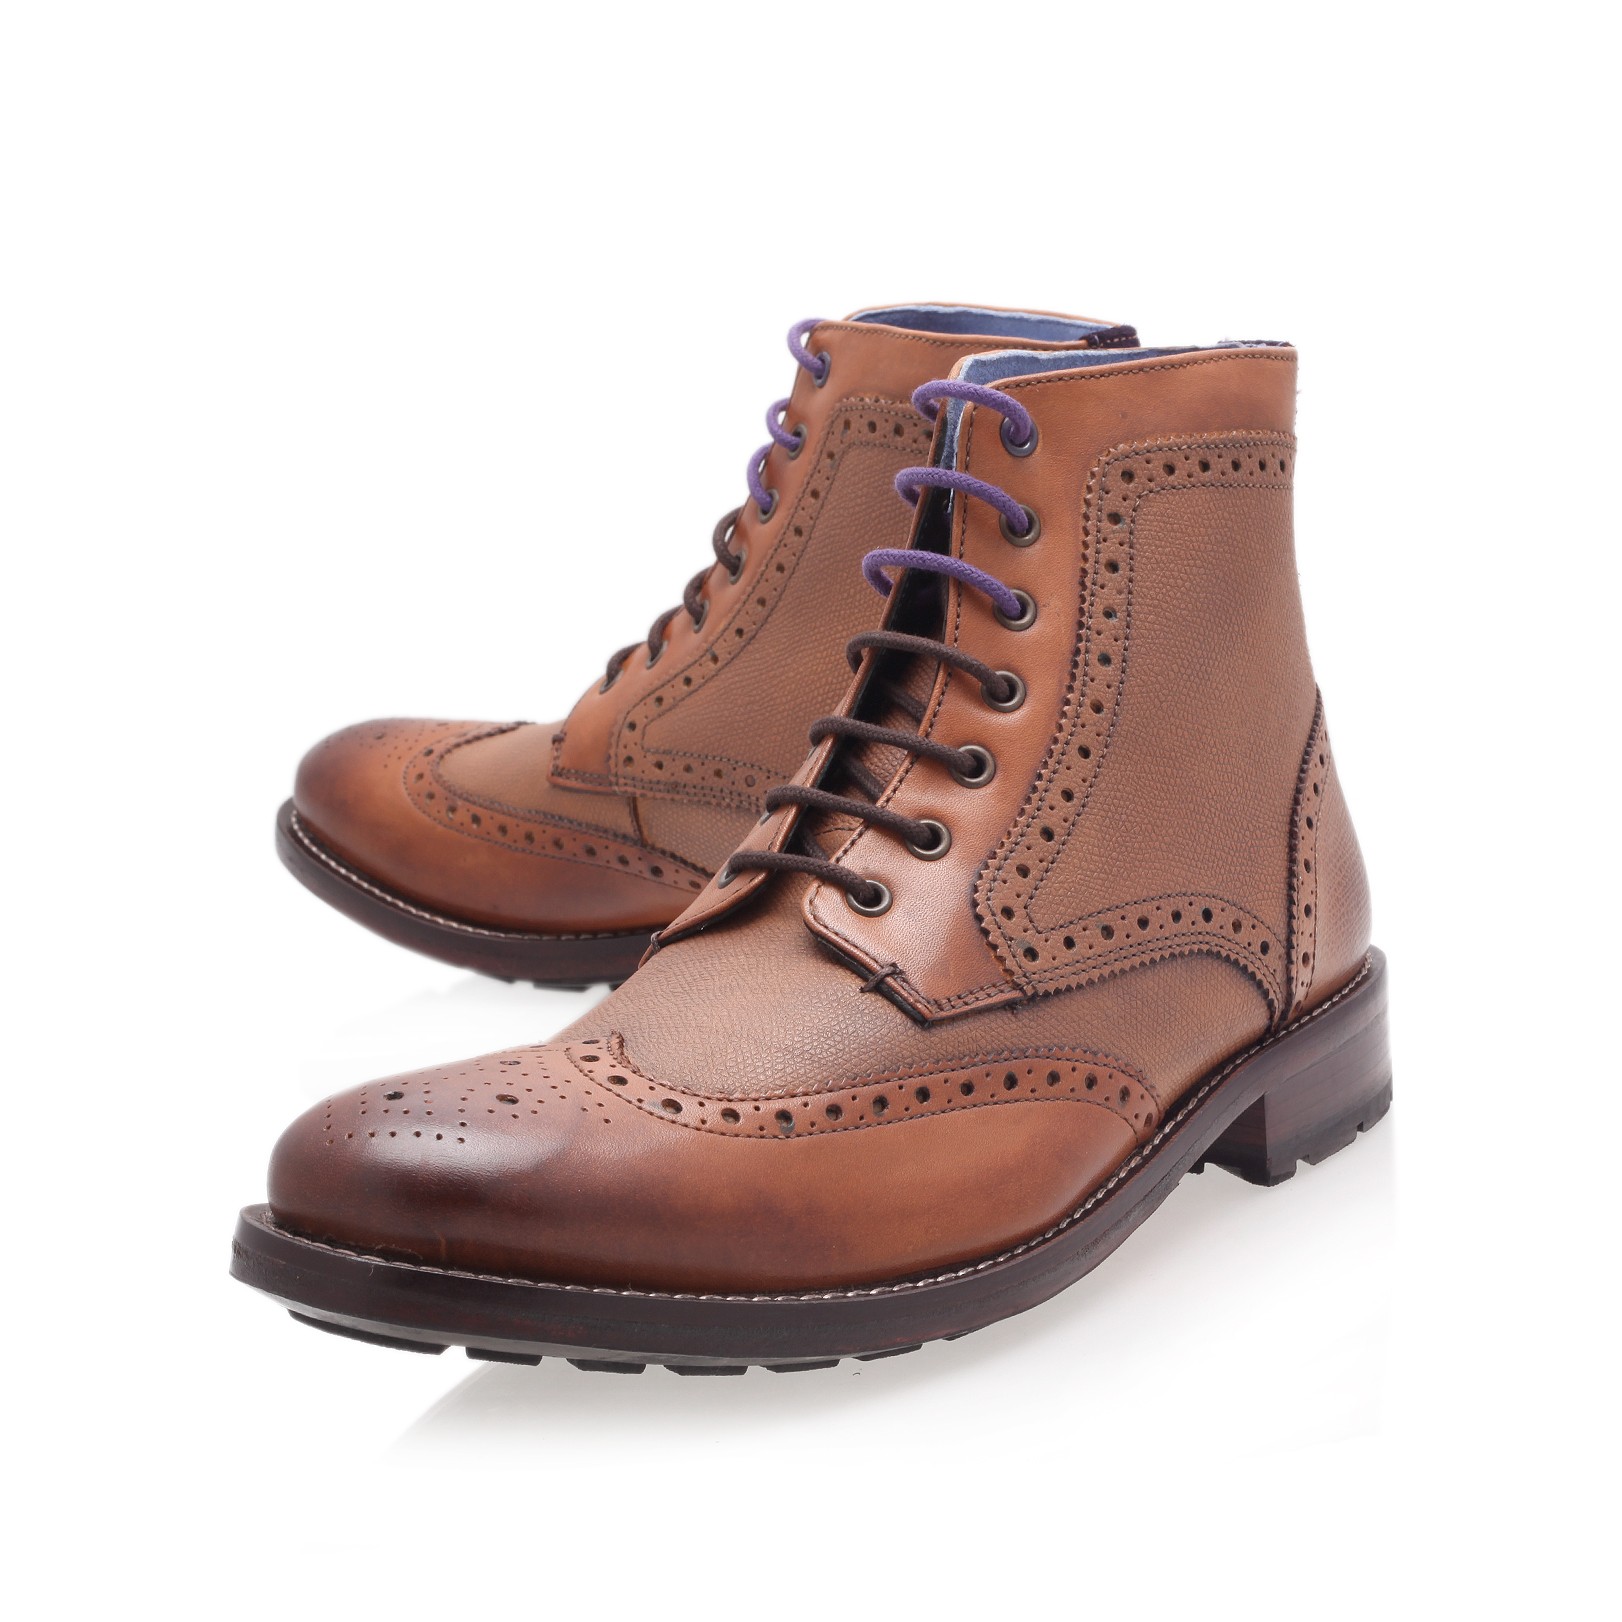 Lyst - Ted Baker Sealls Brogue Boot in Brown for Men